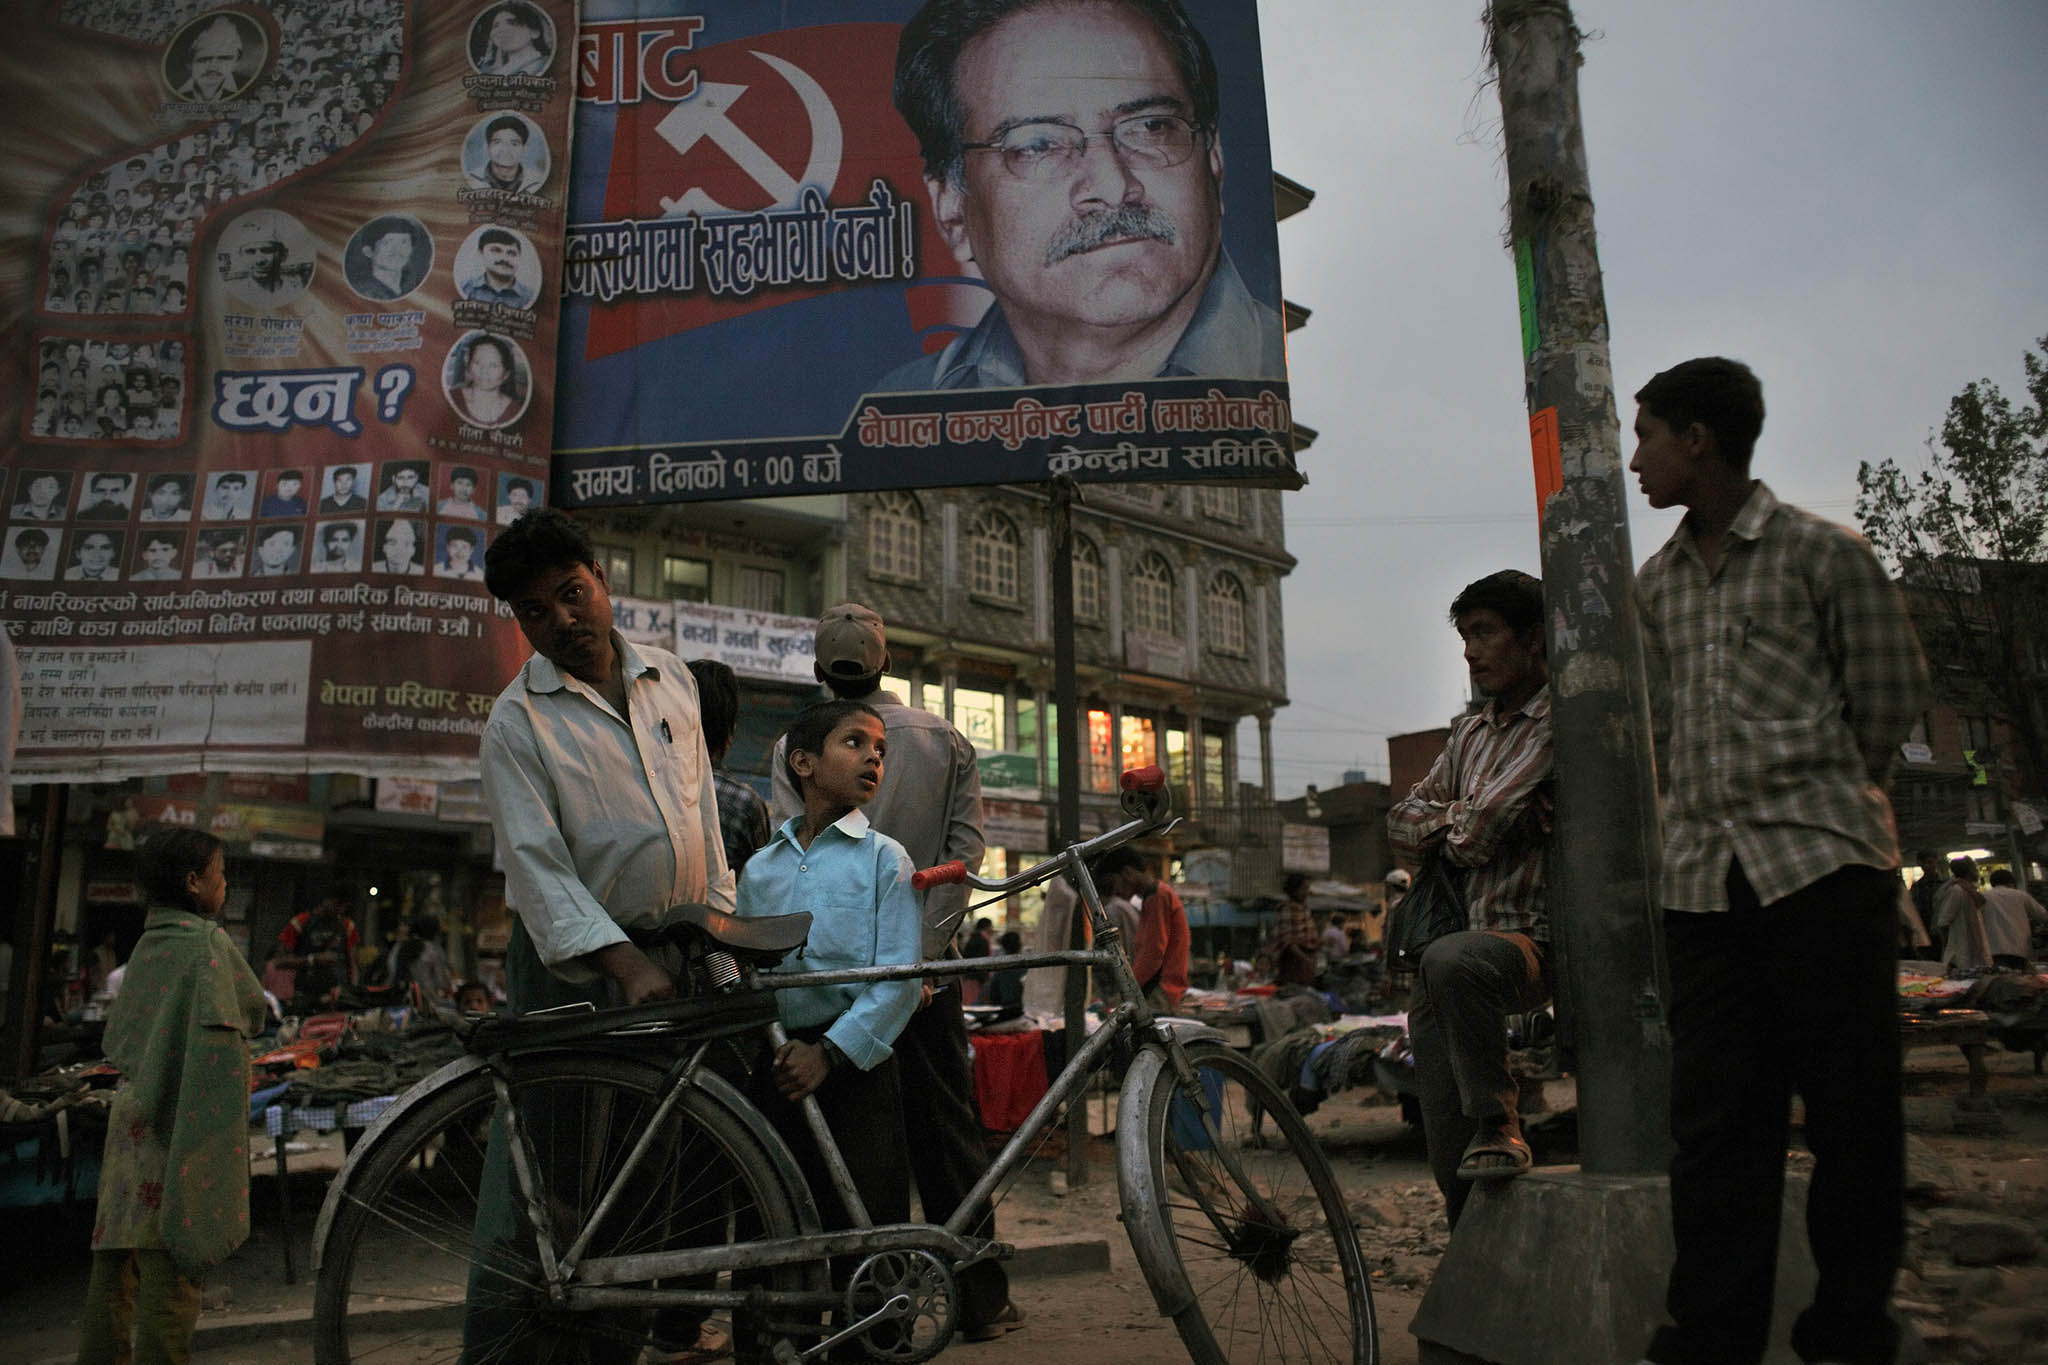 A campaign billboard for Pushpa Kamal Dahal, the former insurgent leader known by his nom de guerre Prachanda, in Katmandu, Nepal. April 14, 2008 (Tomas van Houtryve/The New York Times)